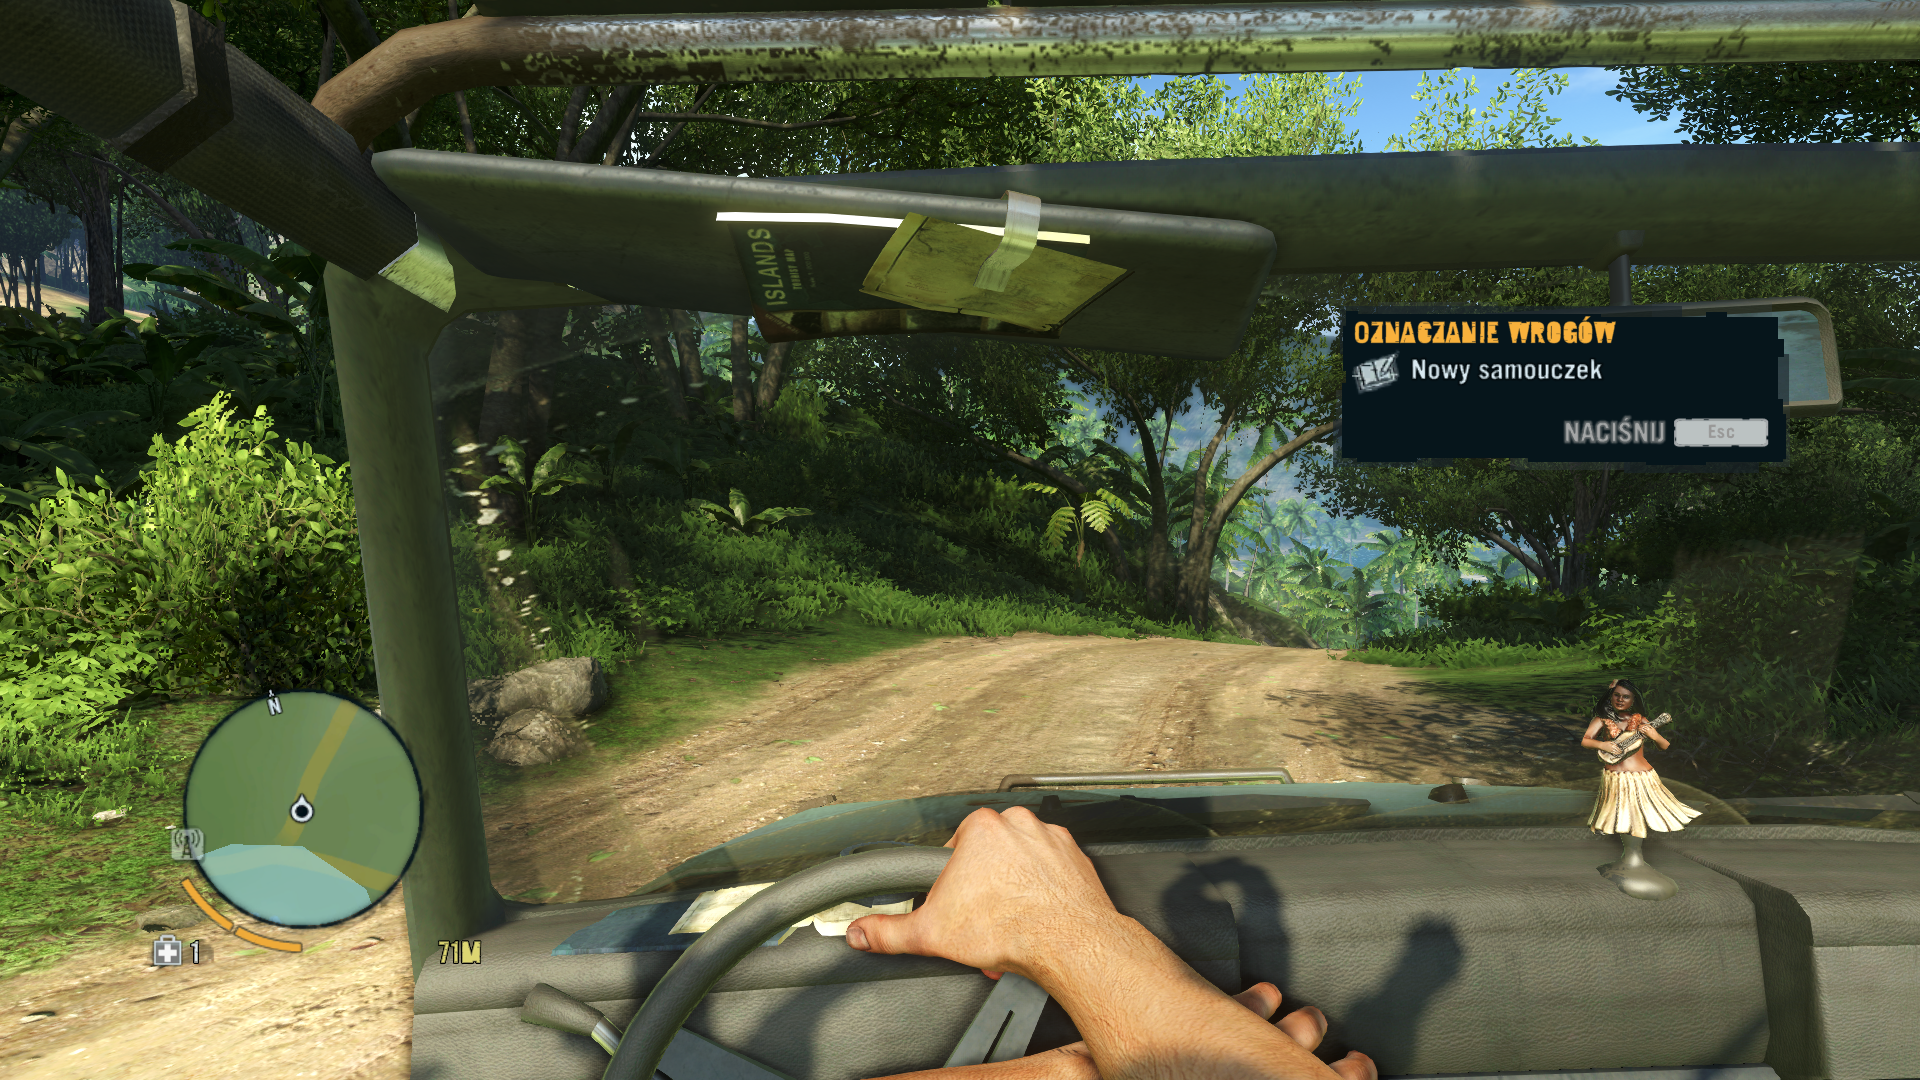 Screeny - farcry3_d3d11 2012-11-29 11-03-36-83.bmp